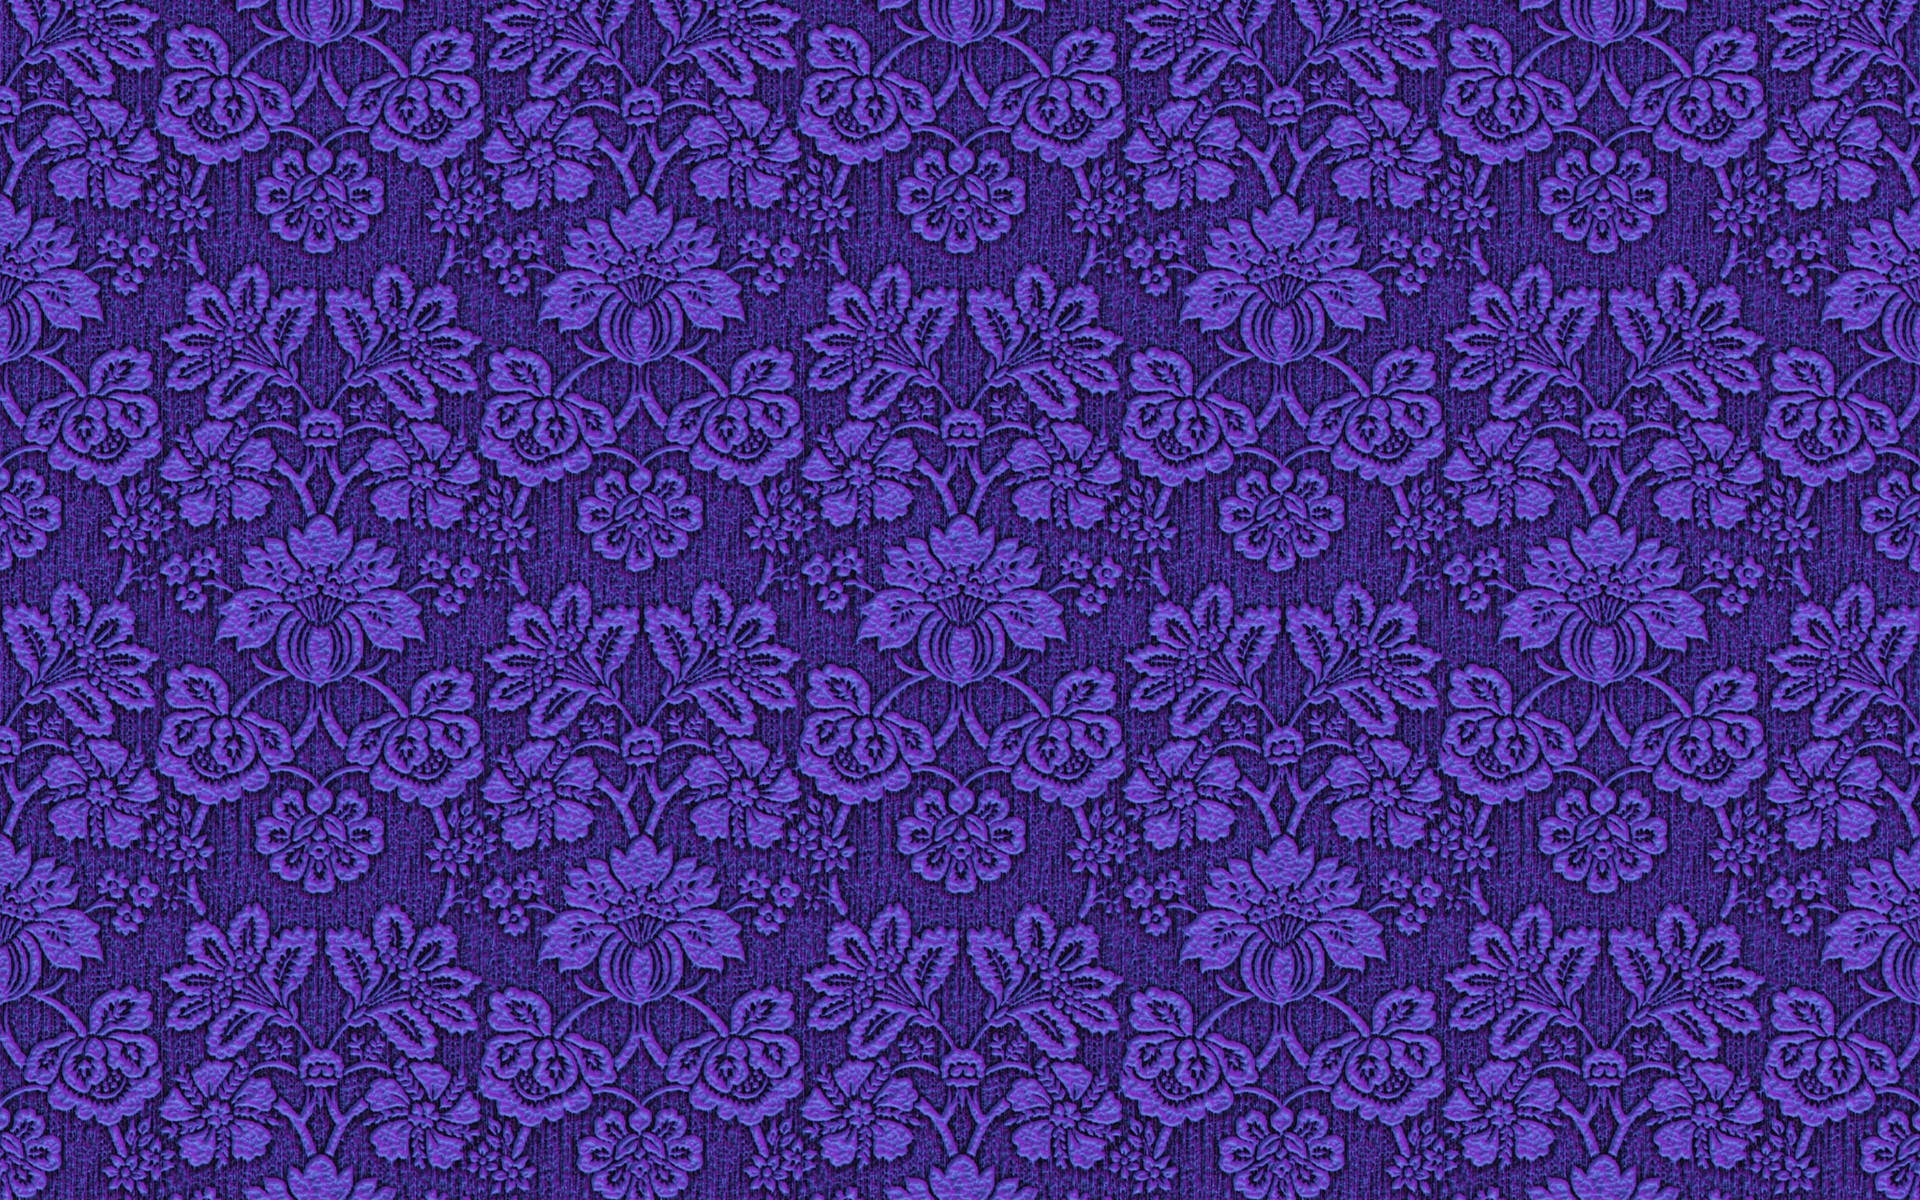 Violet Aesthetic Floral Fabric Background